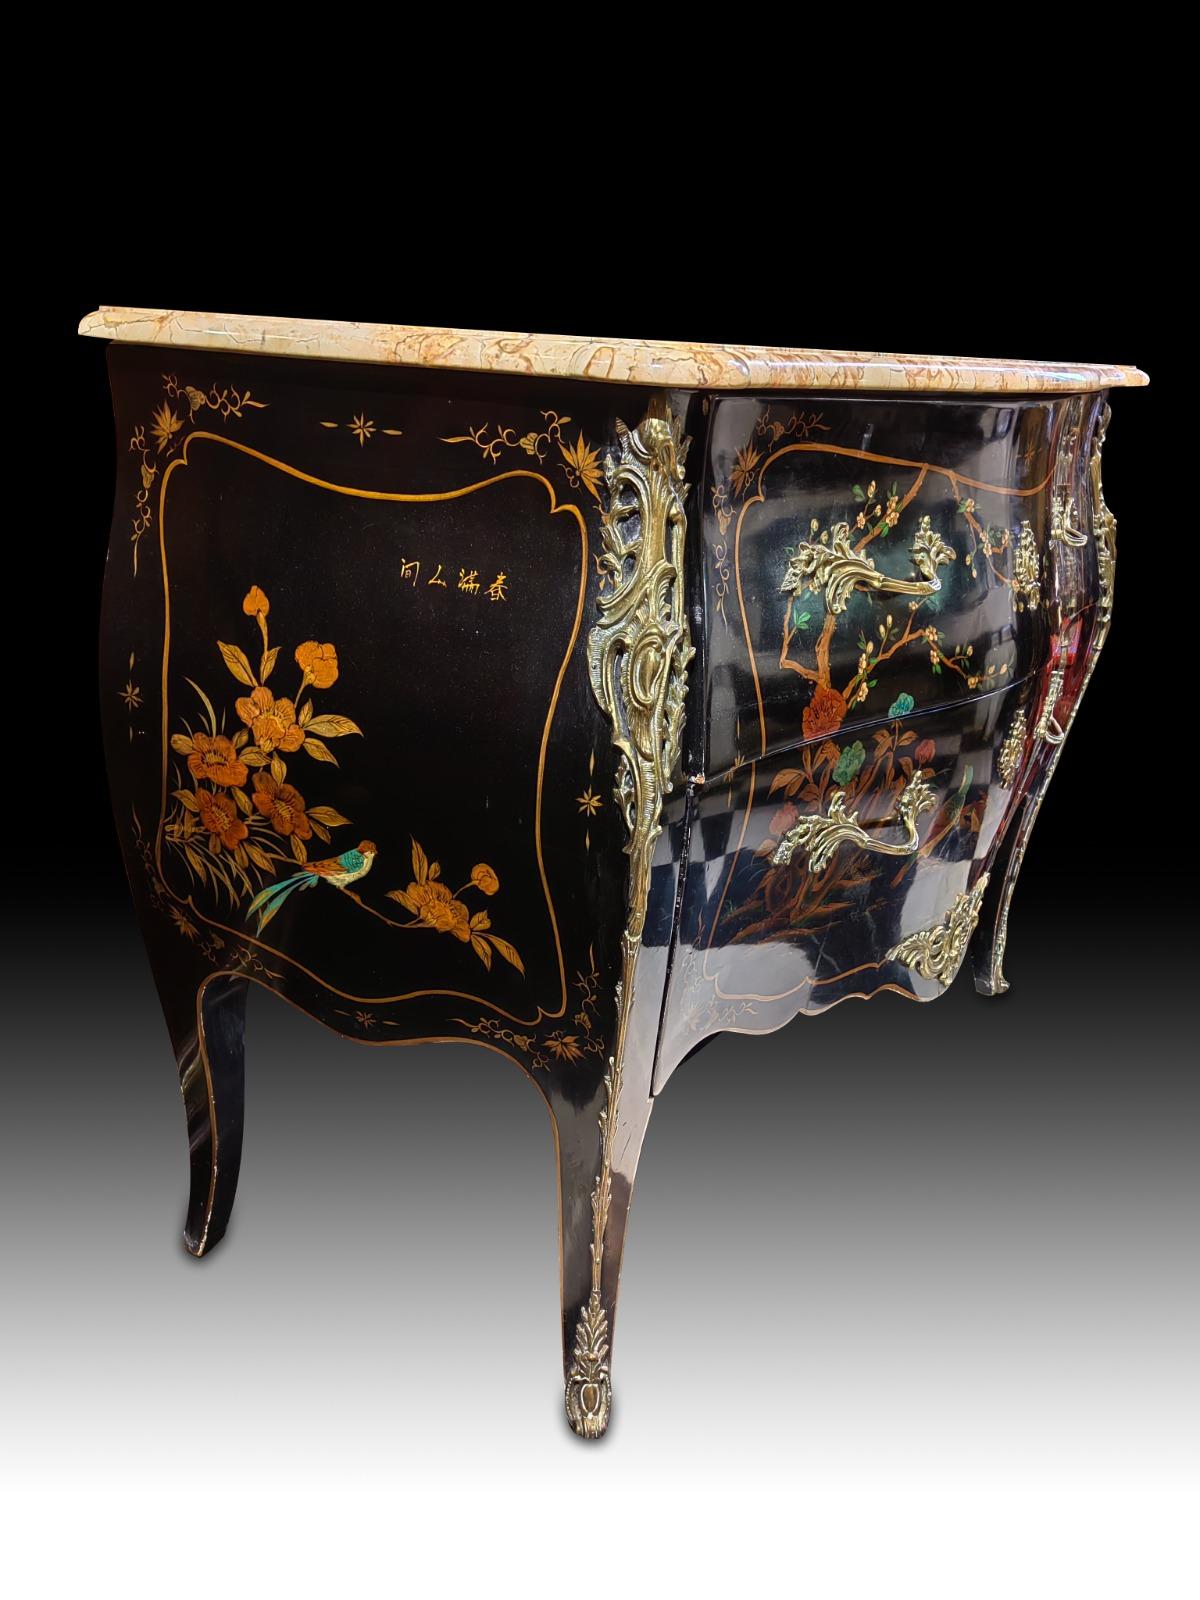 Chinese commode early twentieth century. Black lacquered and decorated to asian taste. Signed. Good condition. Circa 1900. Measures: 110x55x85 cm.
Good condition.